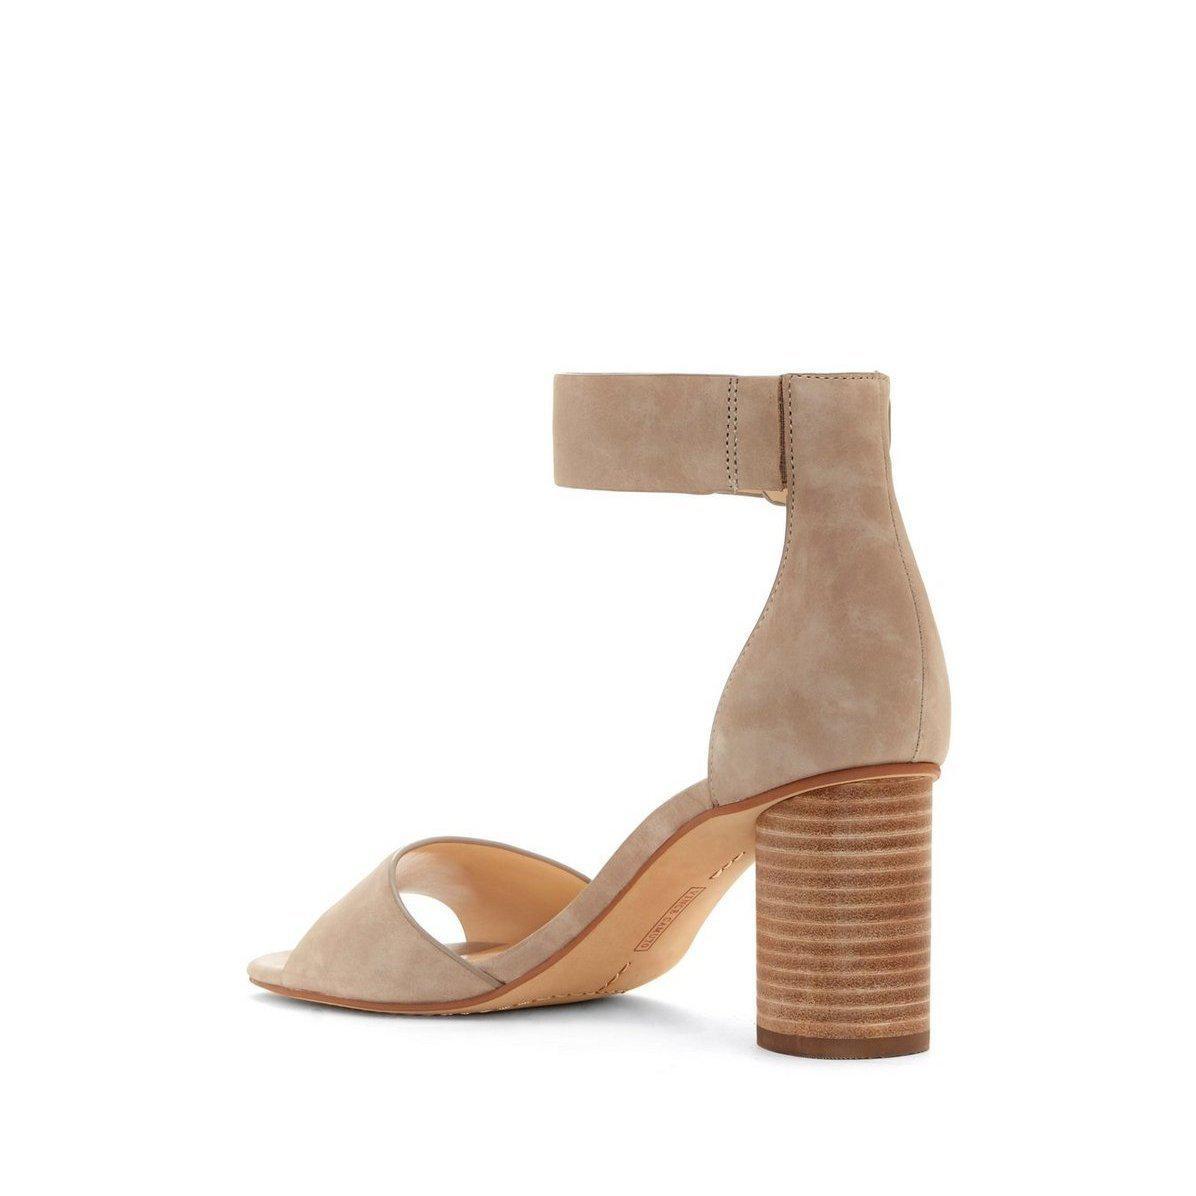 Vince Camuto Jacon Two-Piece Cylinder-Heel City Sandals-Shoes-Vince Camuto-6.5-ShoeShock